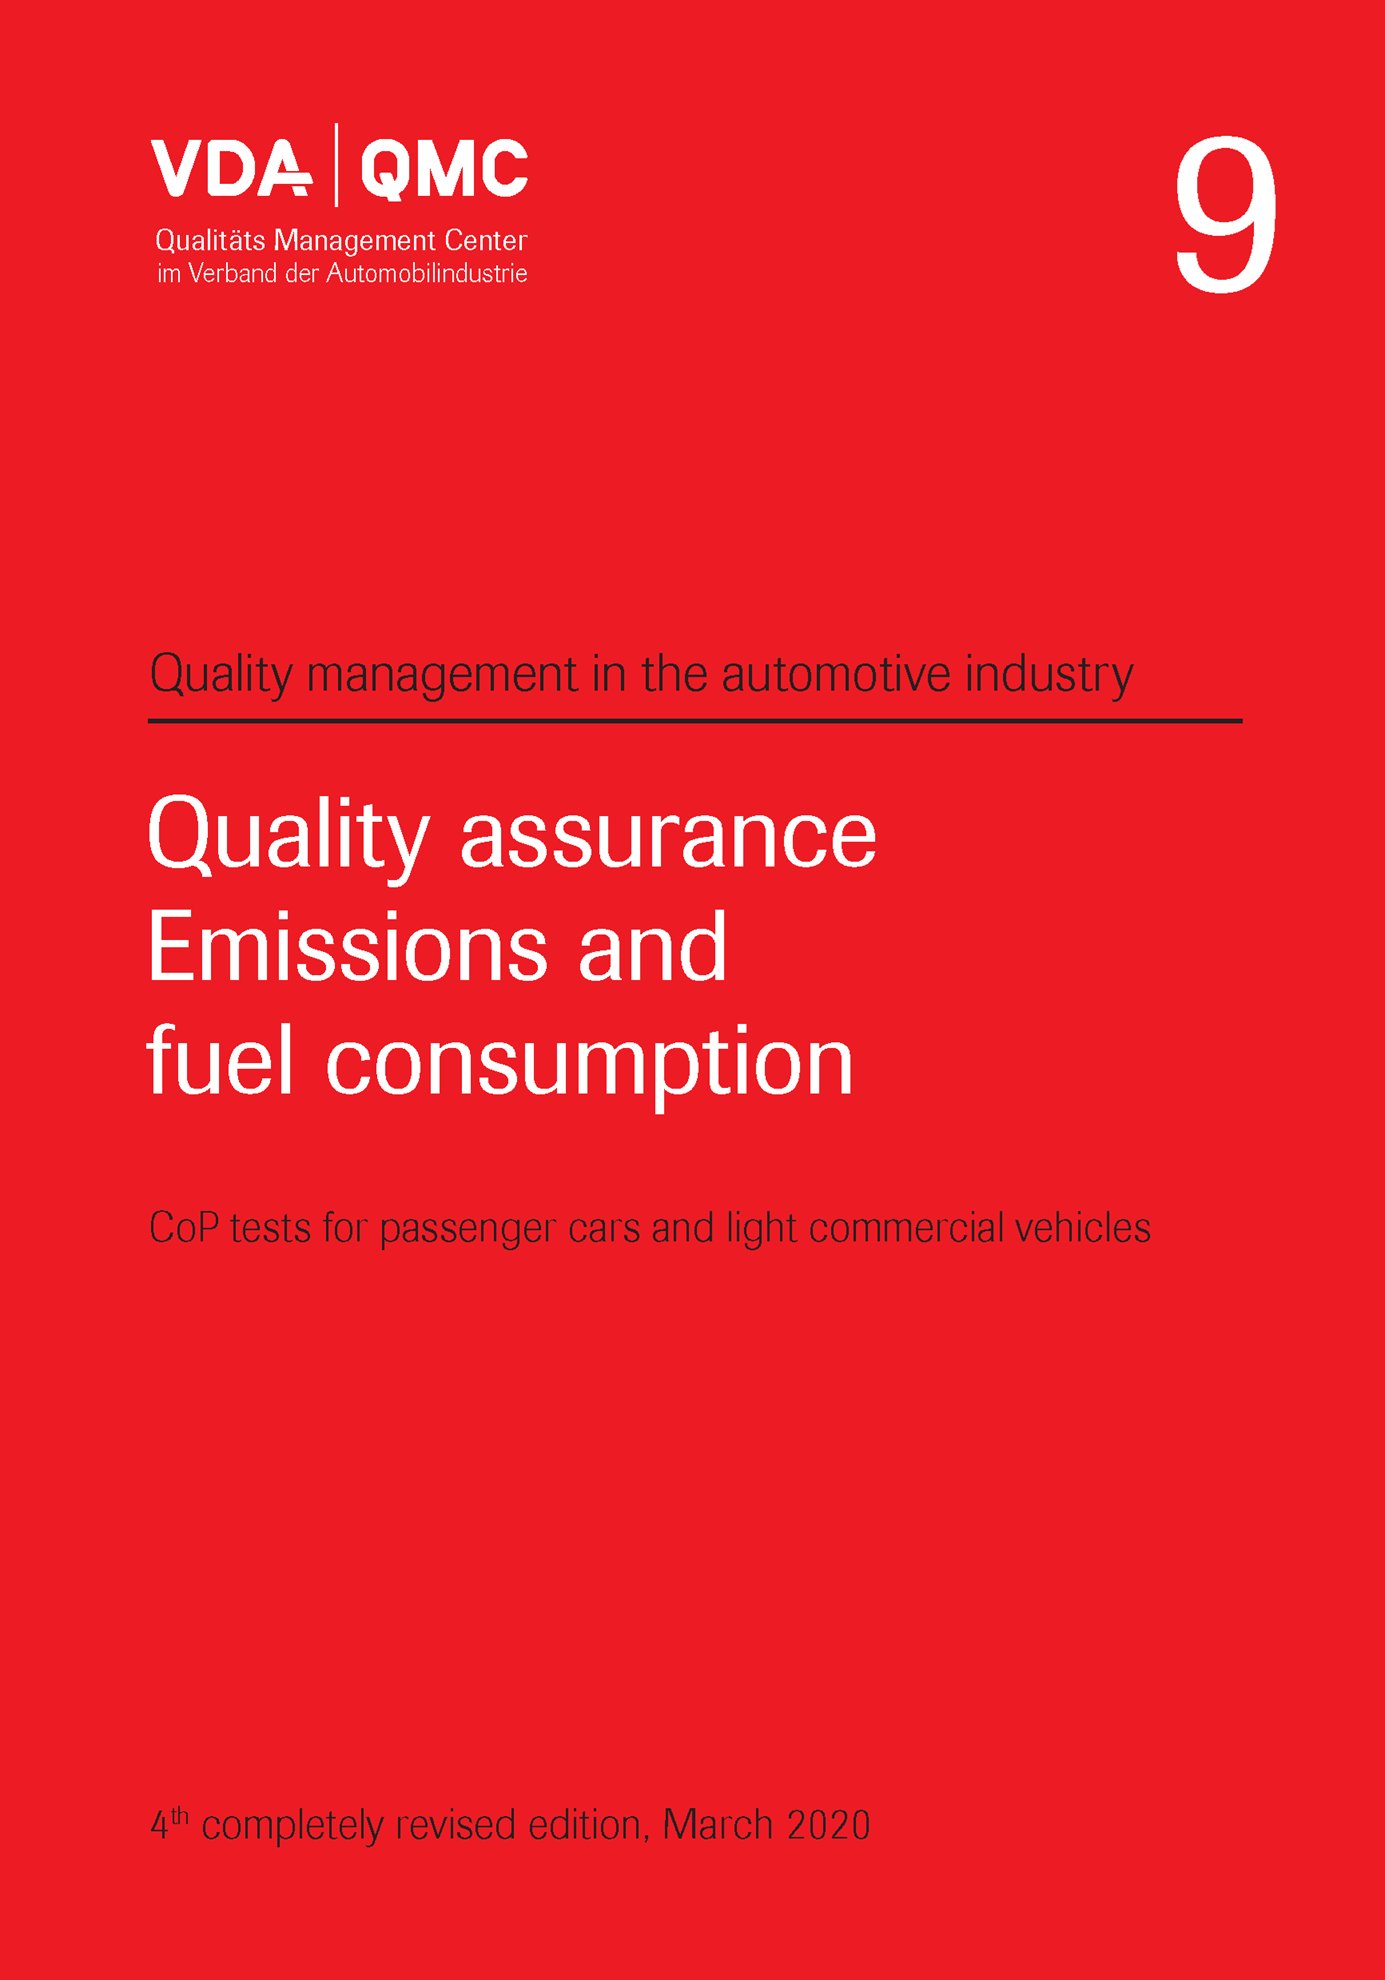 Publikácie  VDA Volume 9
 Quality Assurance
 Emissions and Fuel Consumption
 CoP tests on passenger cars and light commercial vehicles, 4th, completely revised edition, March 2020 1.3.2020 náhľad